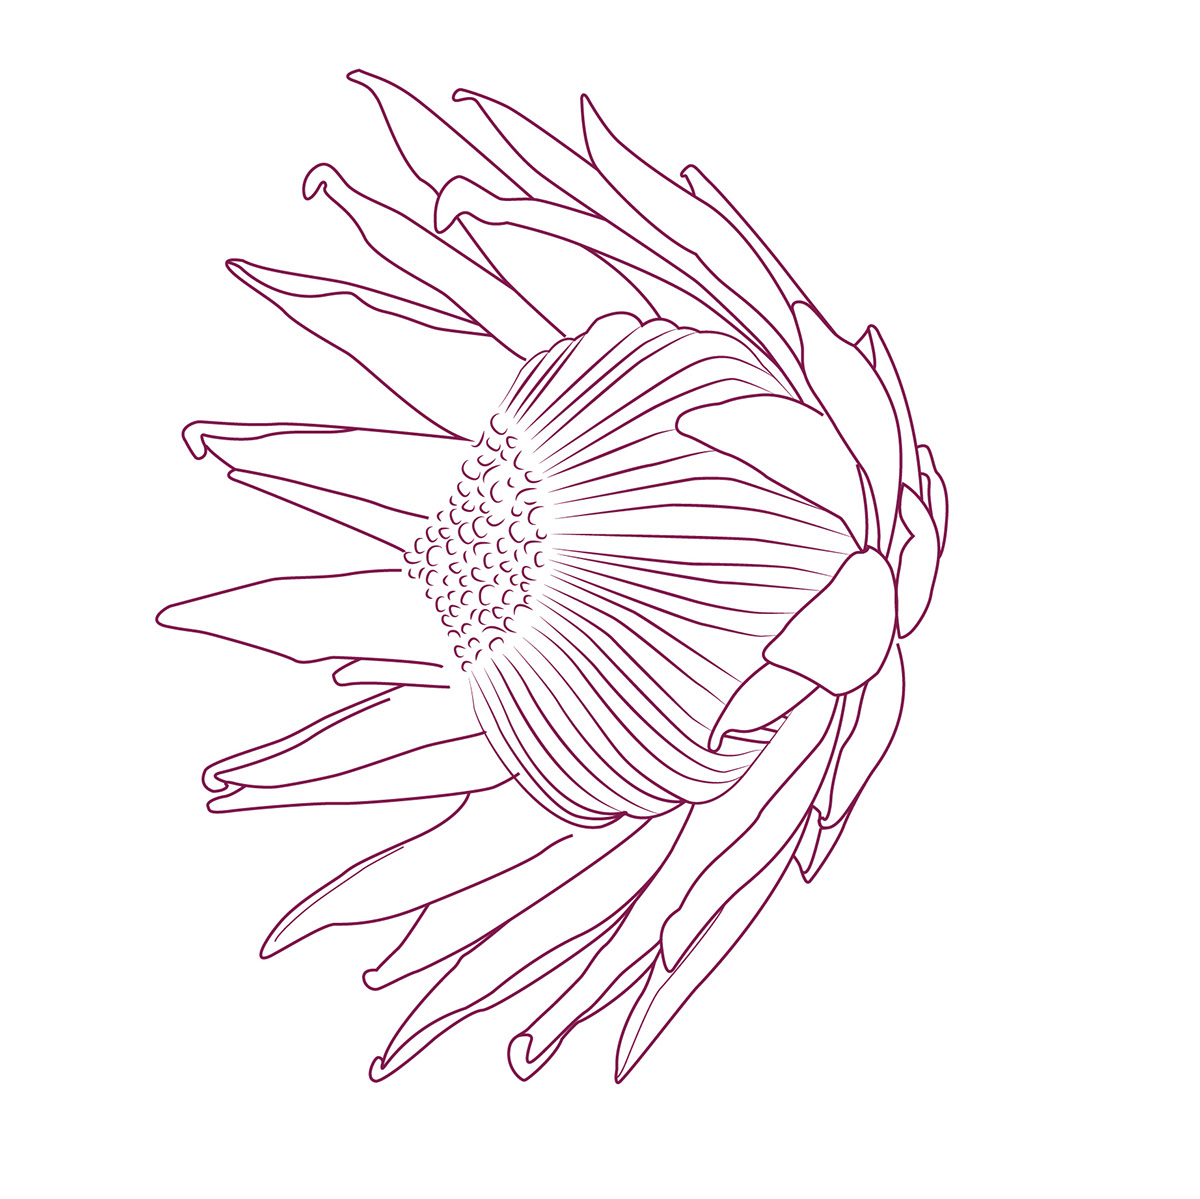 Set king protea linear sketch isolated Royalty Free Vector